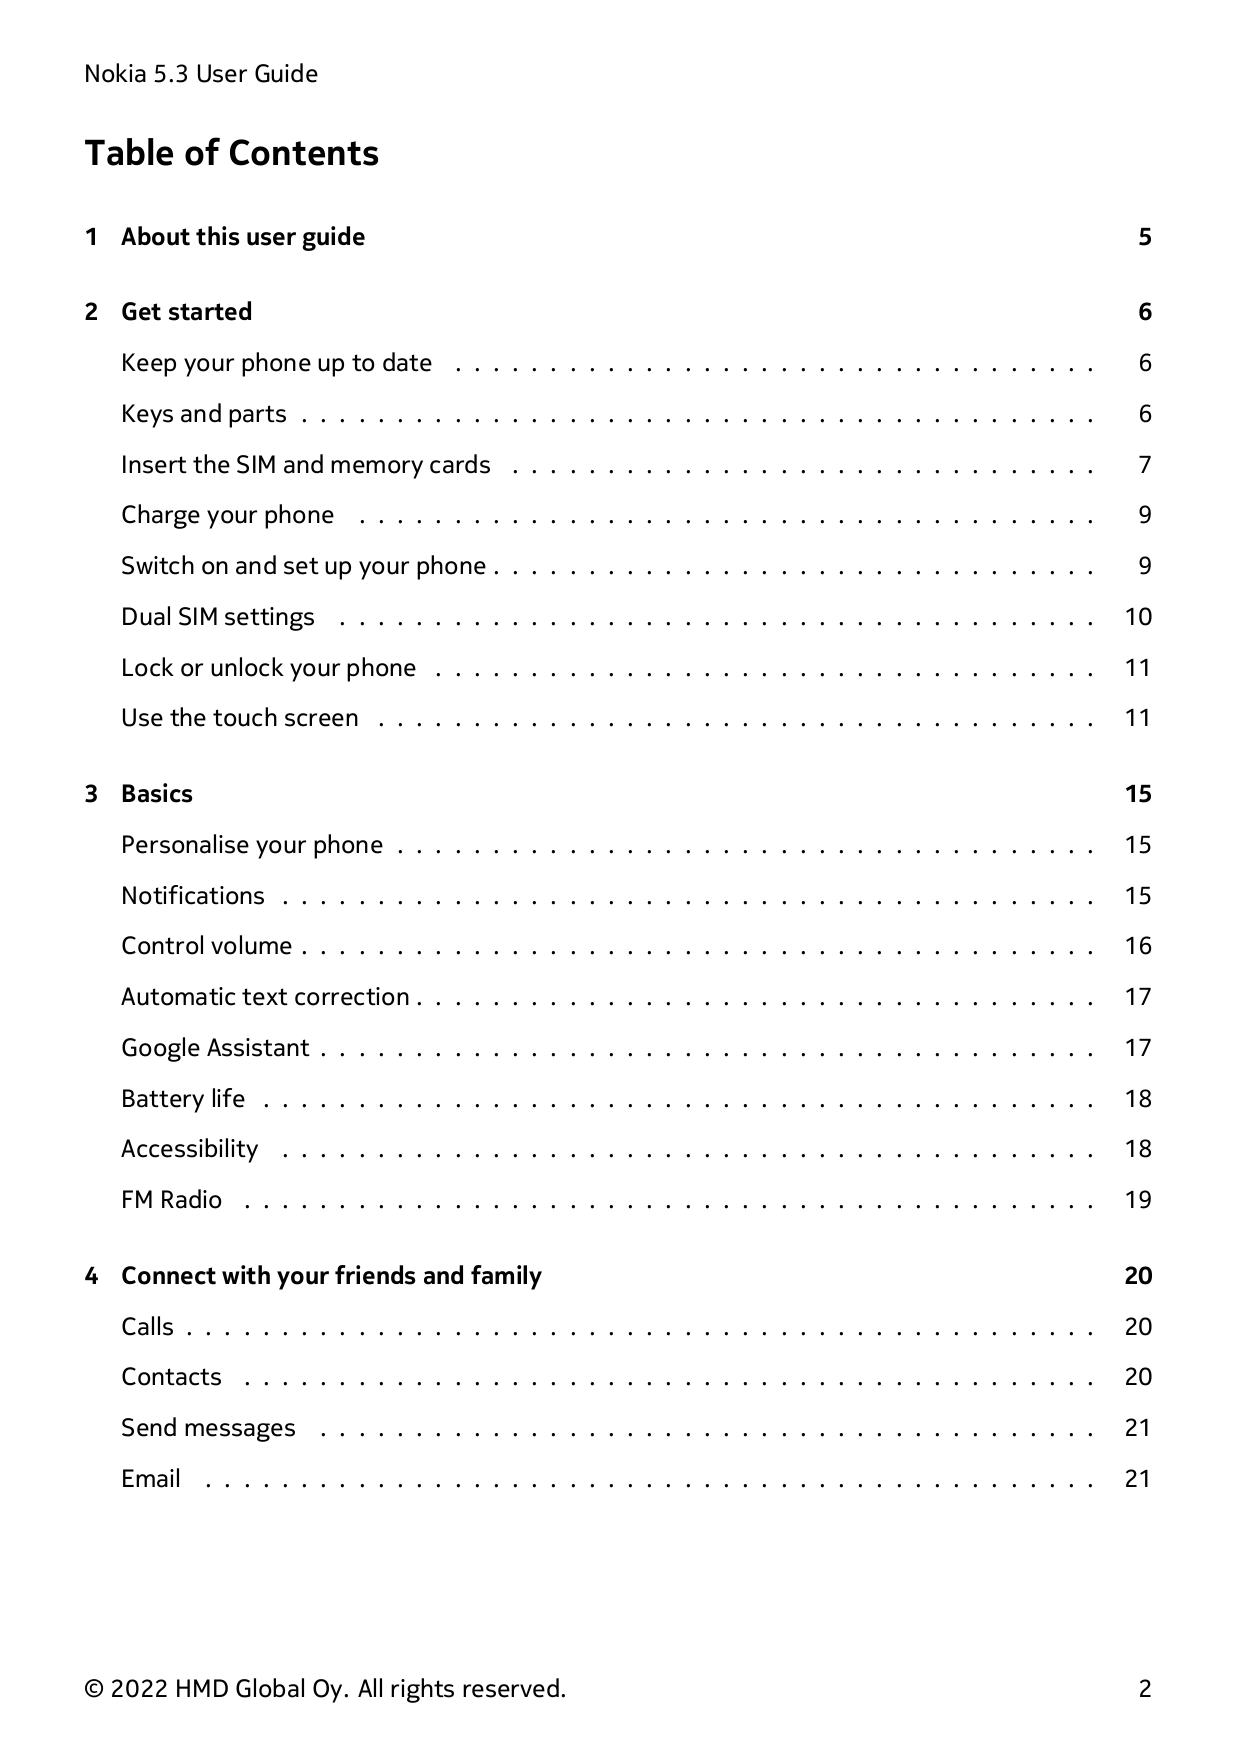 Nokia 5.3 User GuideTable of Contents1 About this user guide52 Get started6Keep your phone up to date . . . . . . . . . . . . . 